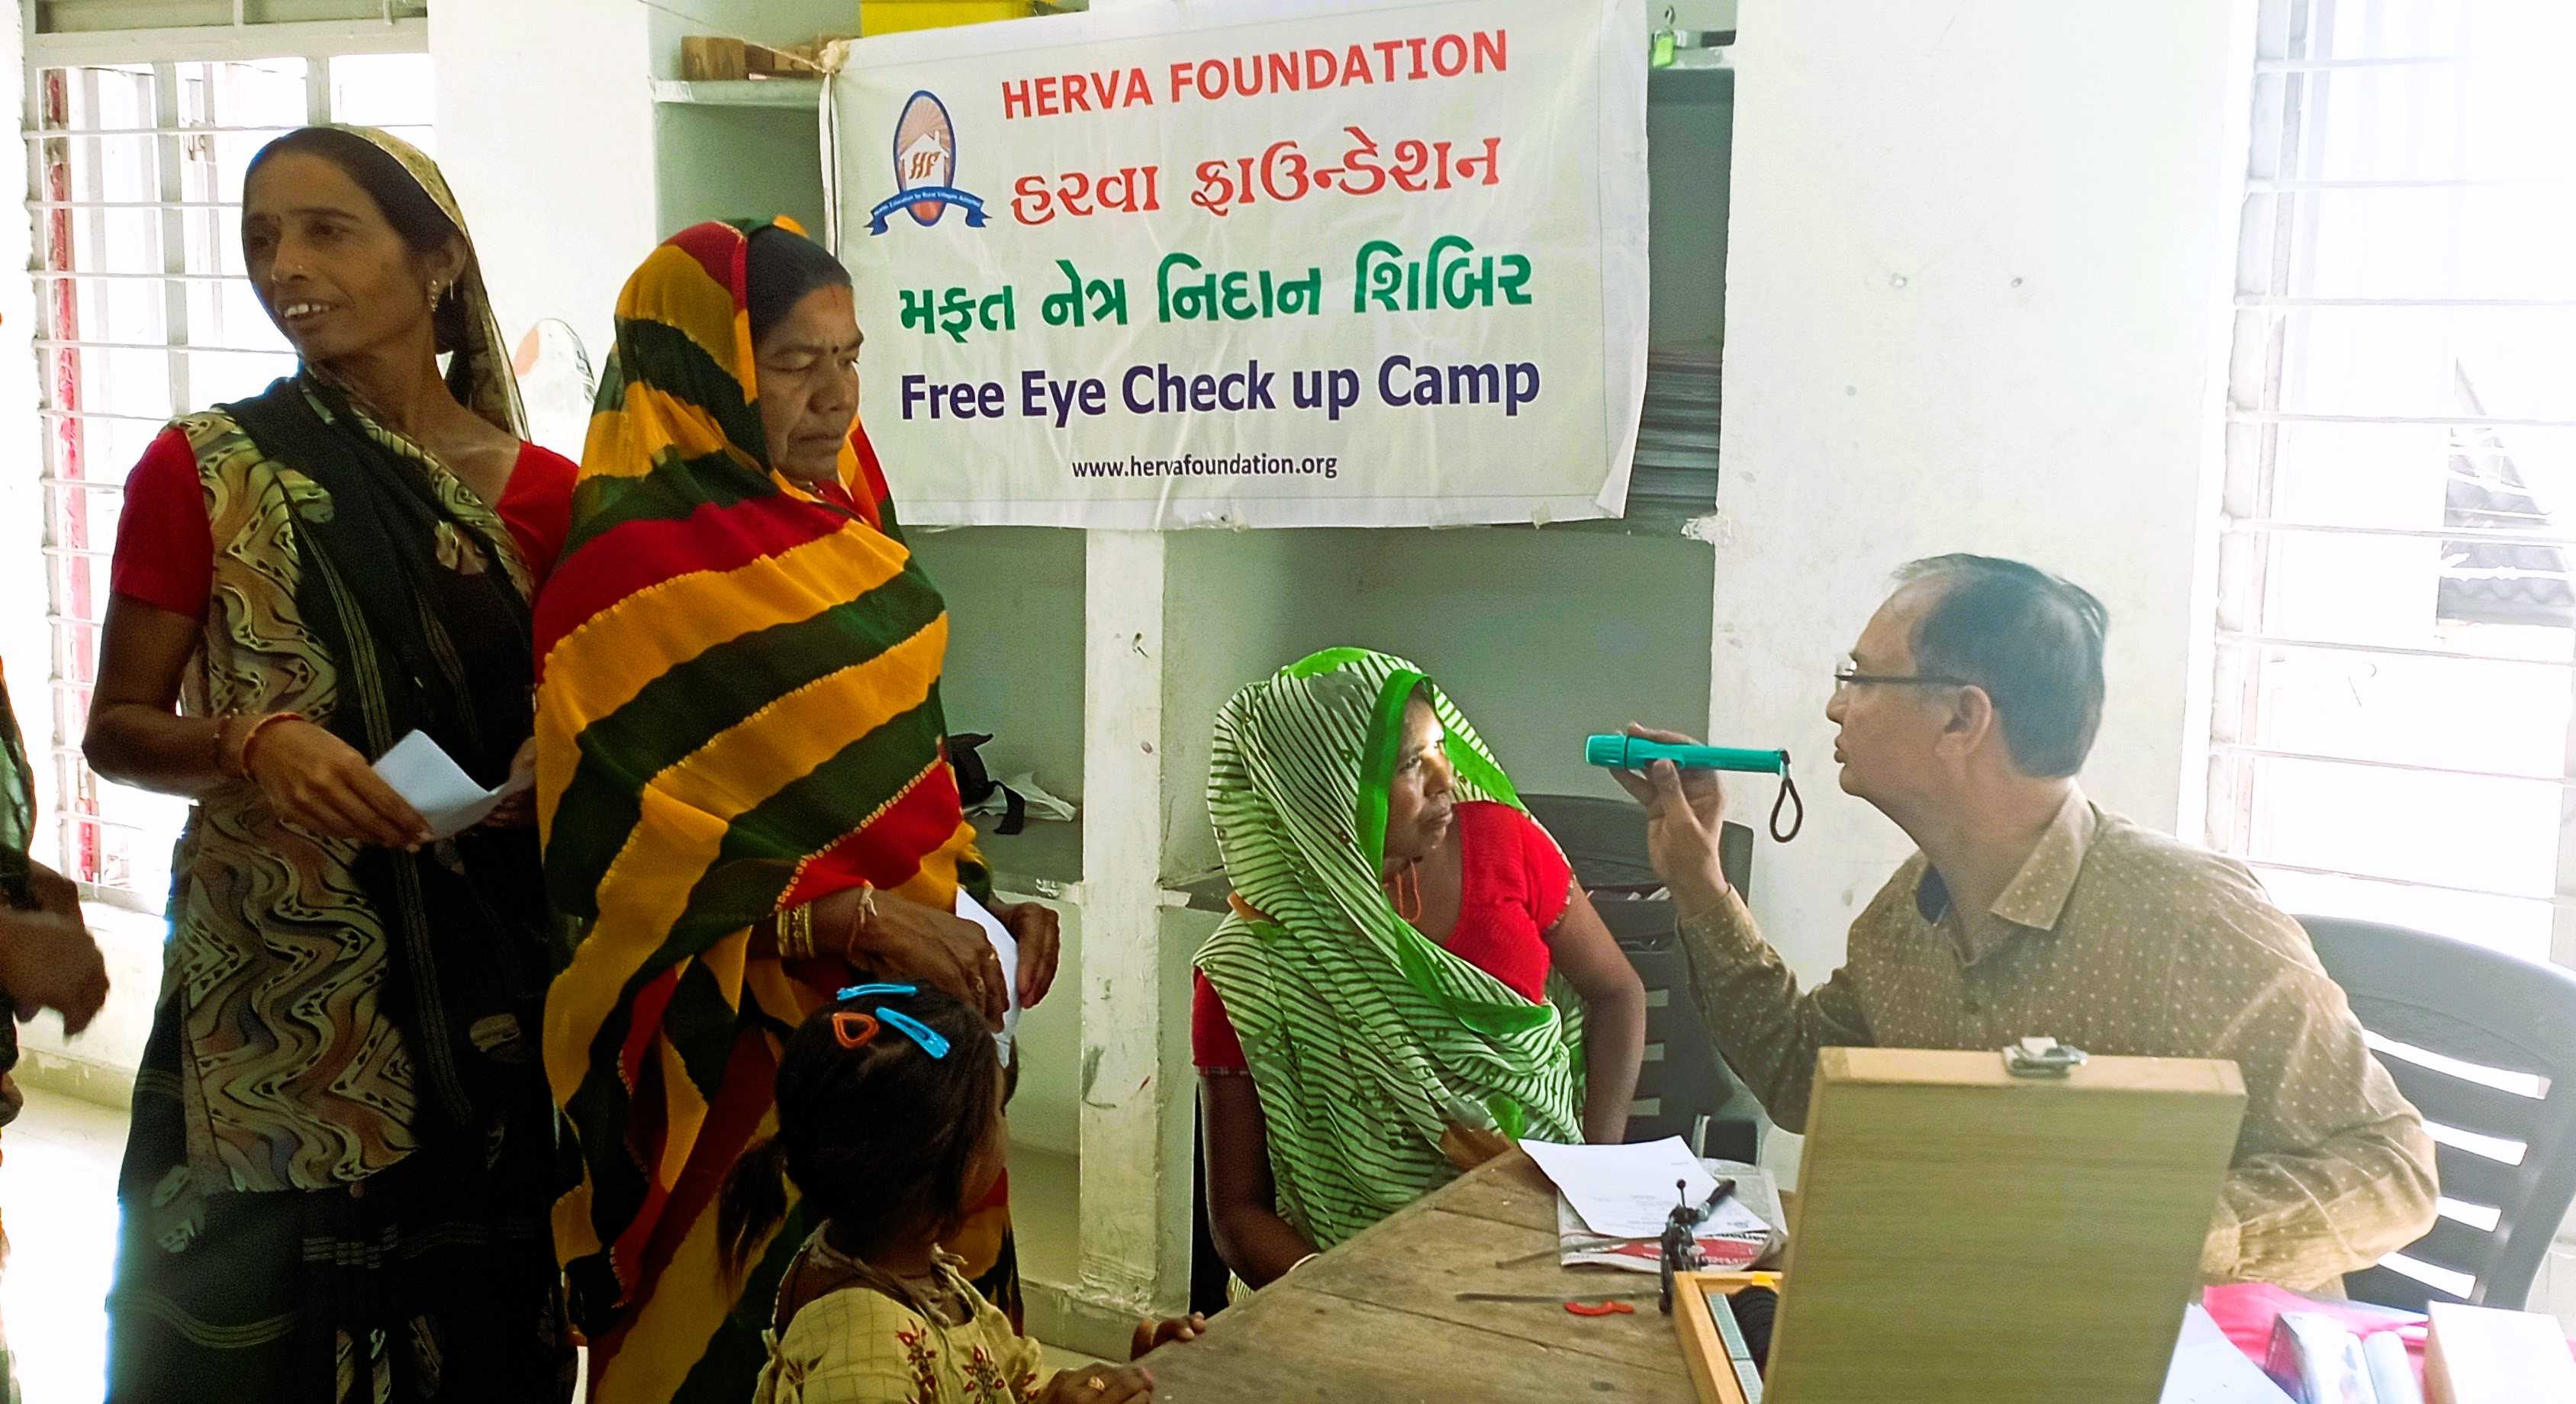 On 24.02.2024 We had a very successful Eye check-up camp and Cyber Security and Crime Awareness program at village Ghoda taluka Viramgam, Gujarat. 
👁️ In Eye Care camp total of 121(males 56 females 65) turned up for eye check-ups of which 26 were a senior citizen (male 13 & female13) of which 7 patients had cataracts and were advised for operation at a nearby hospital.
We thank Dr Chandrakant Patel for giving us his time and efficiently managing singlehandedly the eye camp.
🖥️ In the Cyber Security Awareness program total of 56 students of the 9th and 10th class of secondary school teachers of school and some villagers joined the program.
Oracle India volunteering, Ahmedabad team explained what cybercrime is all about and how it can be prevented through a video presentation. This program was mainly to bring awareness to the students who are now exposed to the cyber world be it urban or rural. The village women especially the mothers were complaining about how their children were spending most of their time with their smartphones. We, therefore, thought it good to have such a programme to caution the students about the dangers they are exposed to and the precautions they need to take.
We thank the team Oracle India volunteering in Ahmedabad and Ms Archanaben for coming to the distant village to guide the students and create awareness among the villagers regarding the cybercrimes and also the dangers radiation causes to health.
We also thank the principal and staff of the primary and secondary schools of Ghoda for giving chance and providing facilities for this project.


